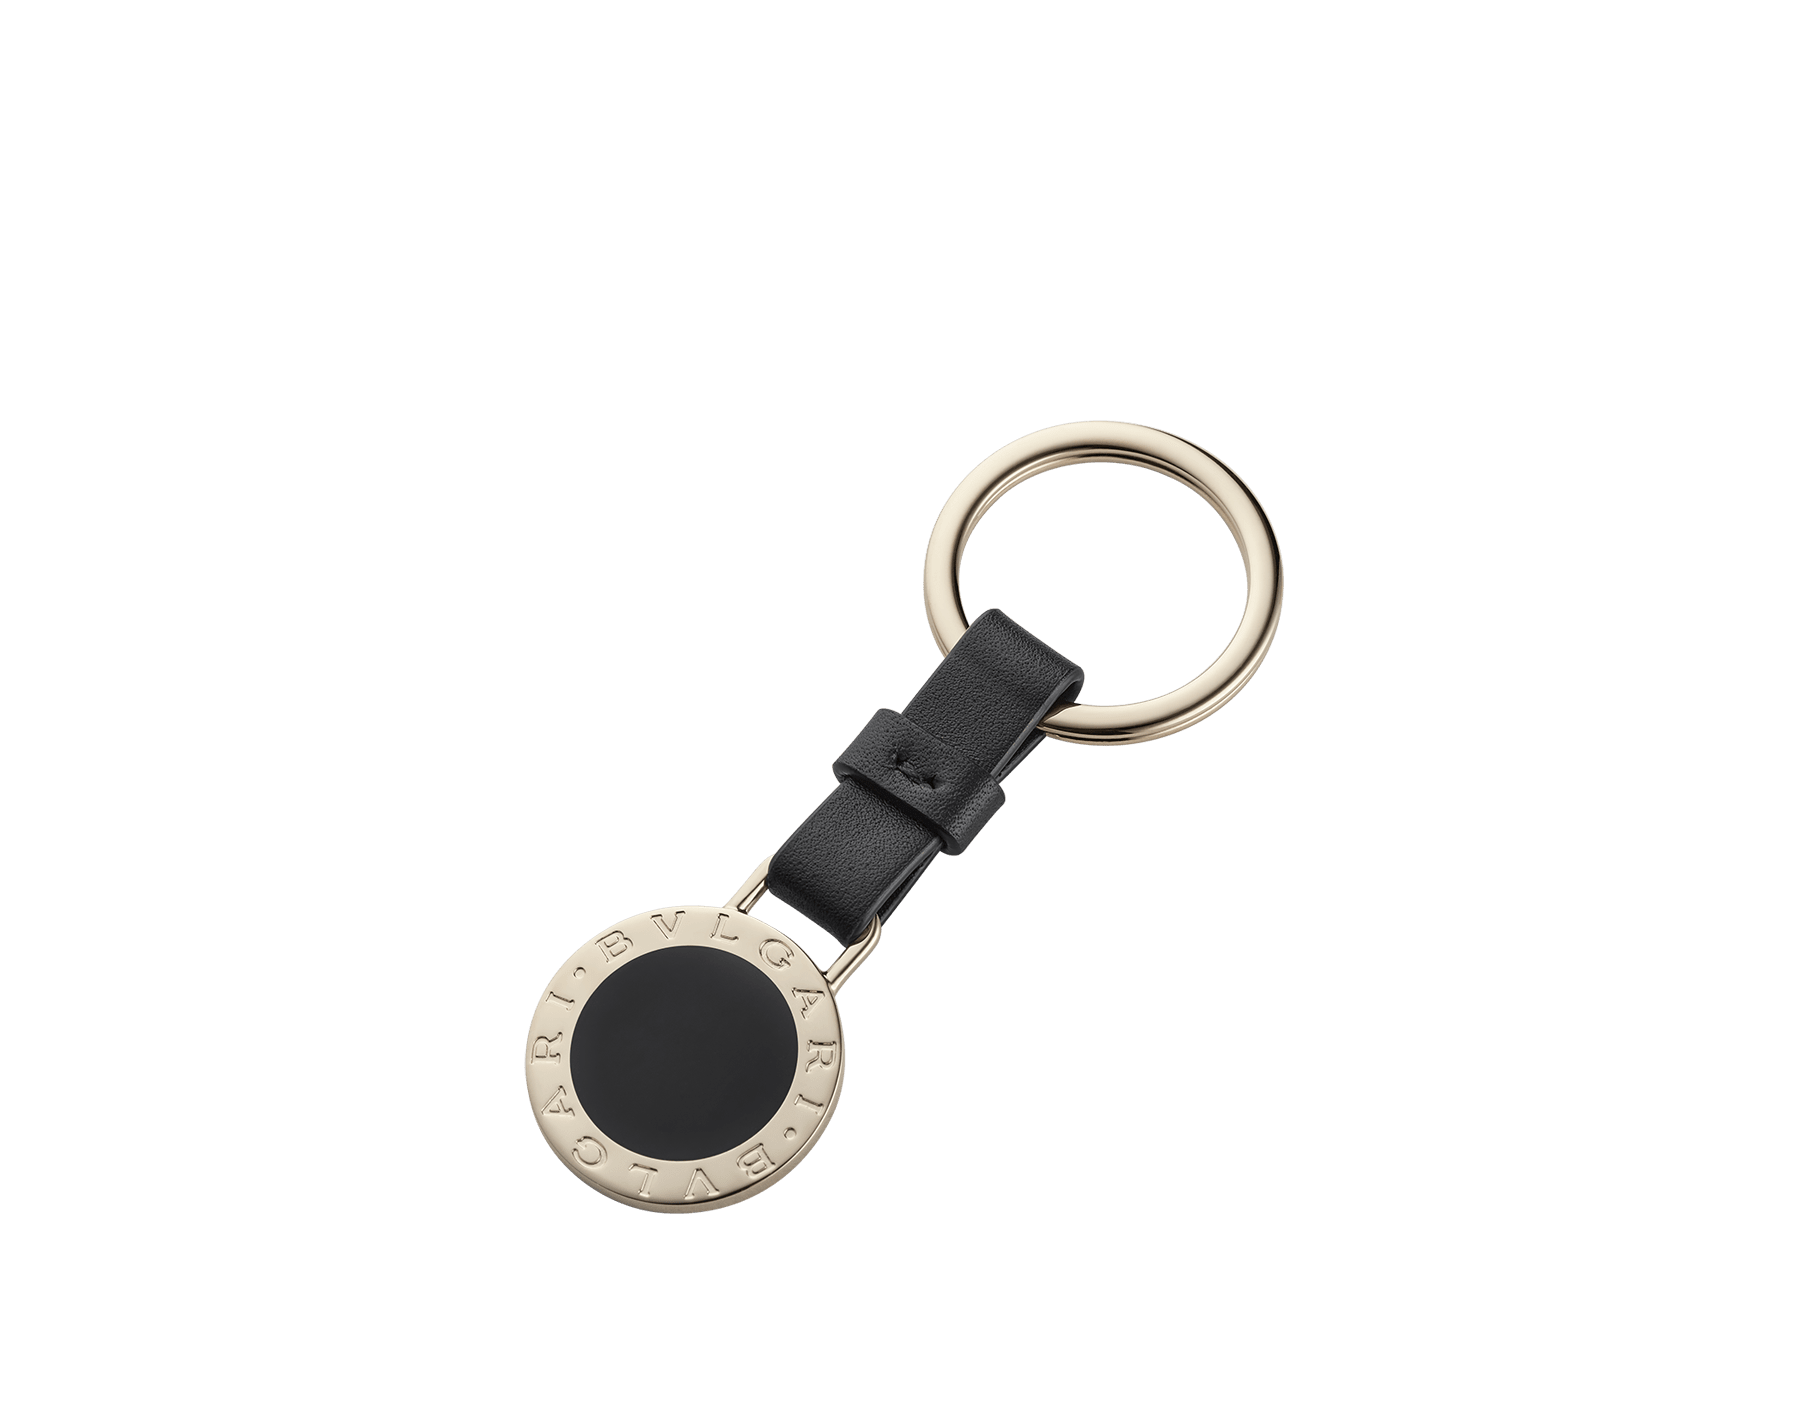 BULGARI BULGARI keyring in black calf leather with light gold-plated brass iconic décor embellished with a black enamel insert and brisé ring. 32764 image 1